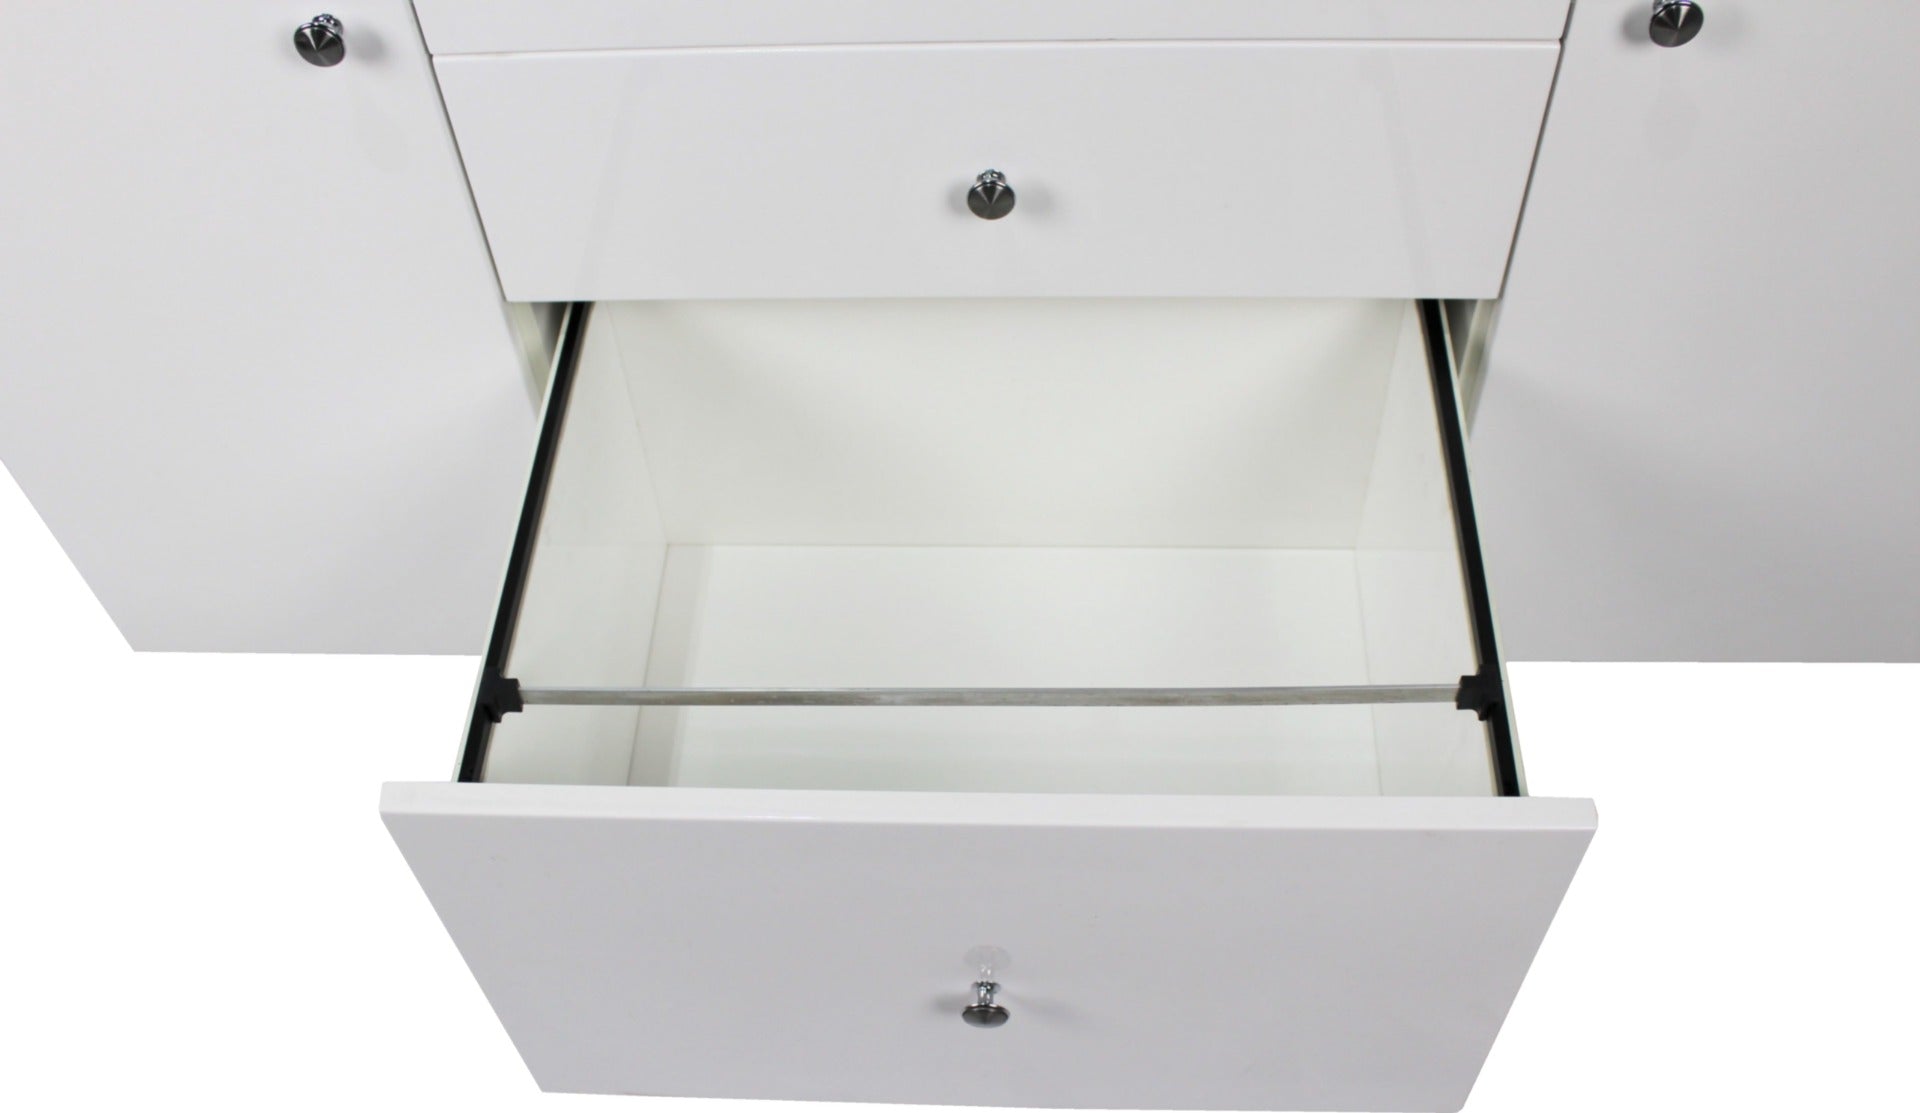 Prosparae T1381-2.0 Gloss White Executive Desk with Pedestal and Return